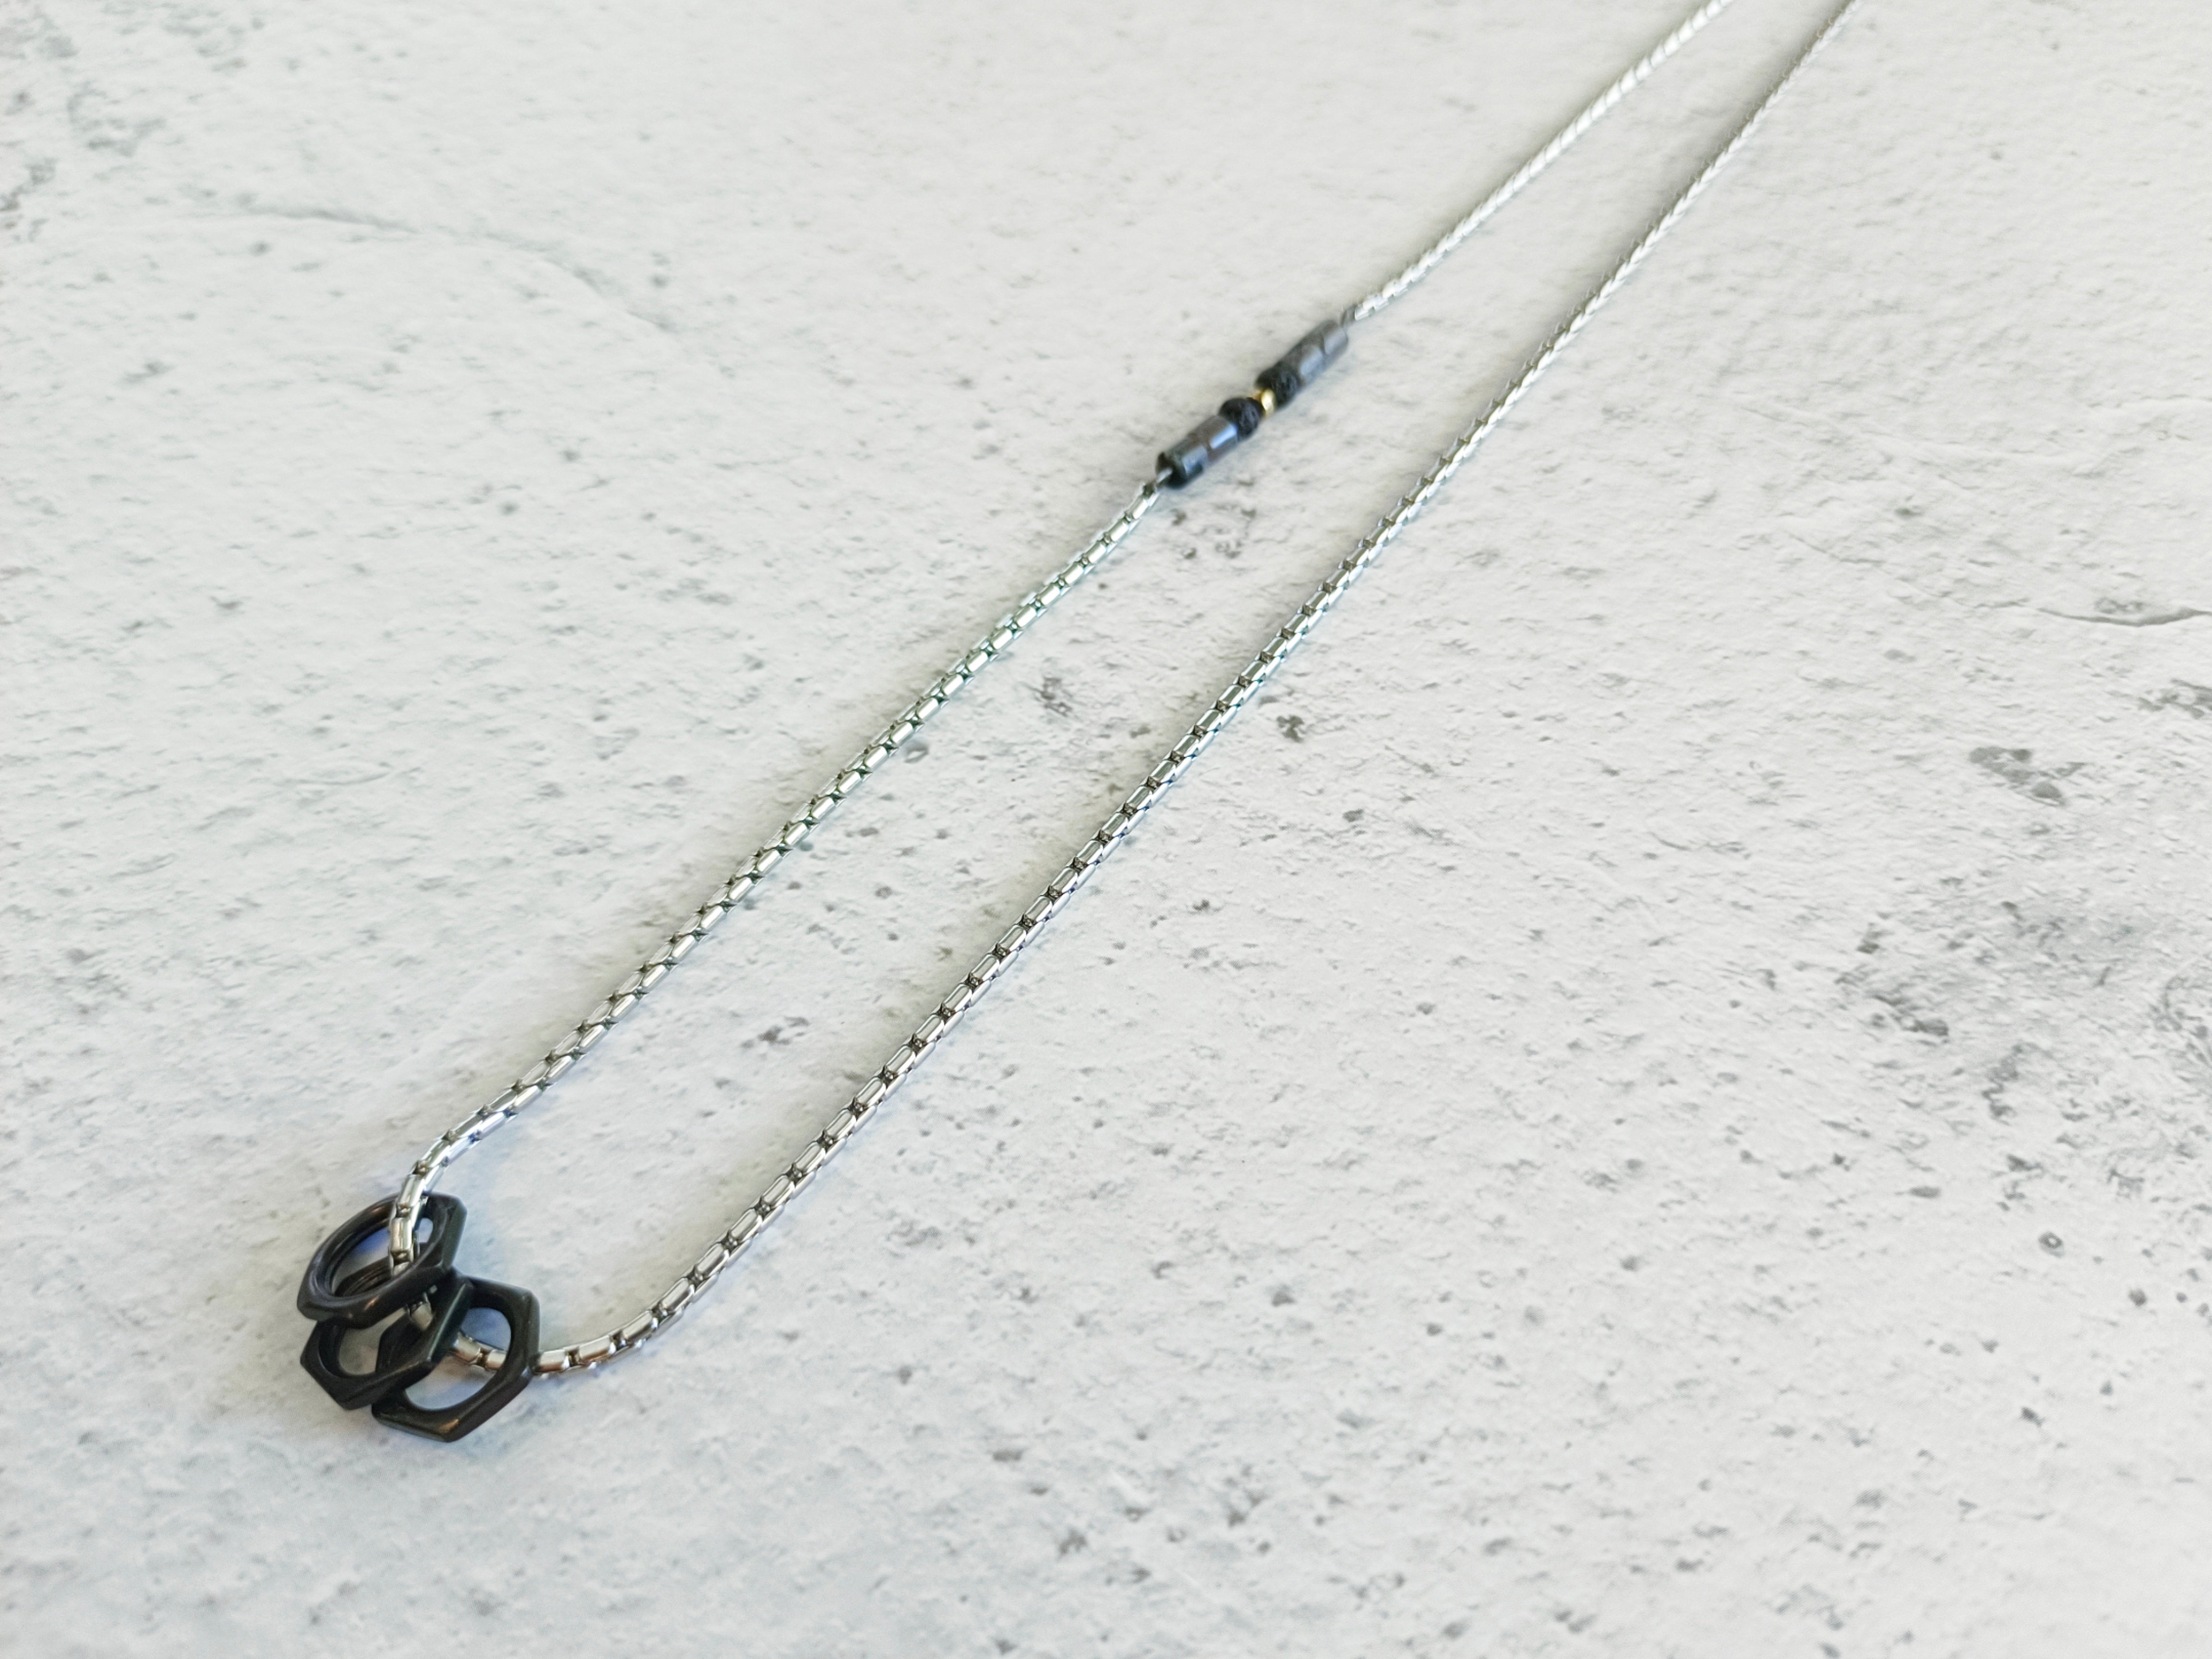 Holidays Rounded stainless steel necklace combined with stones and geometric elements